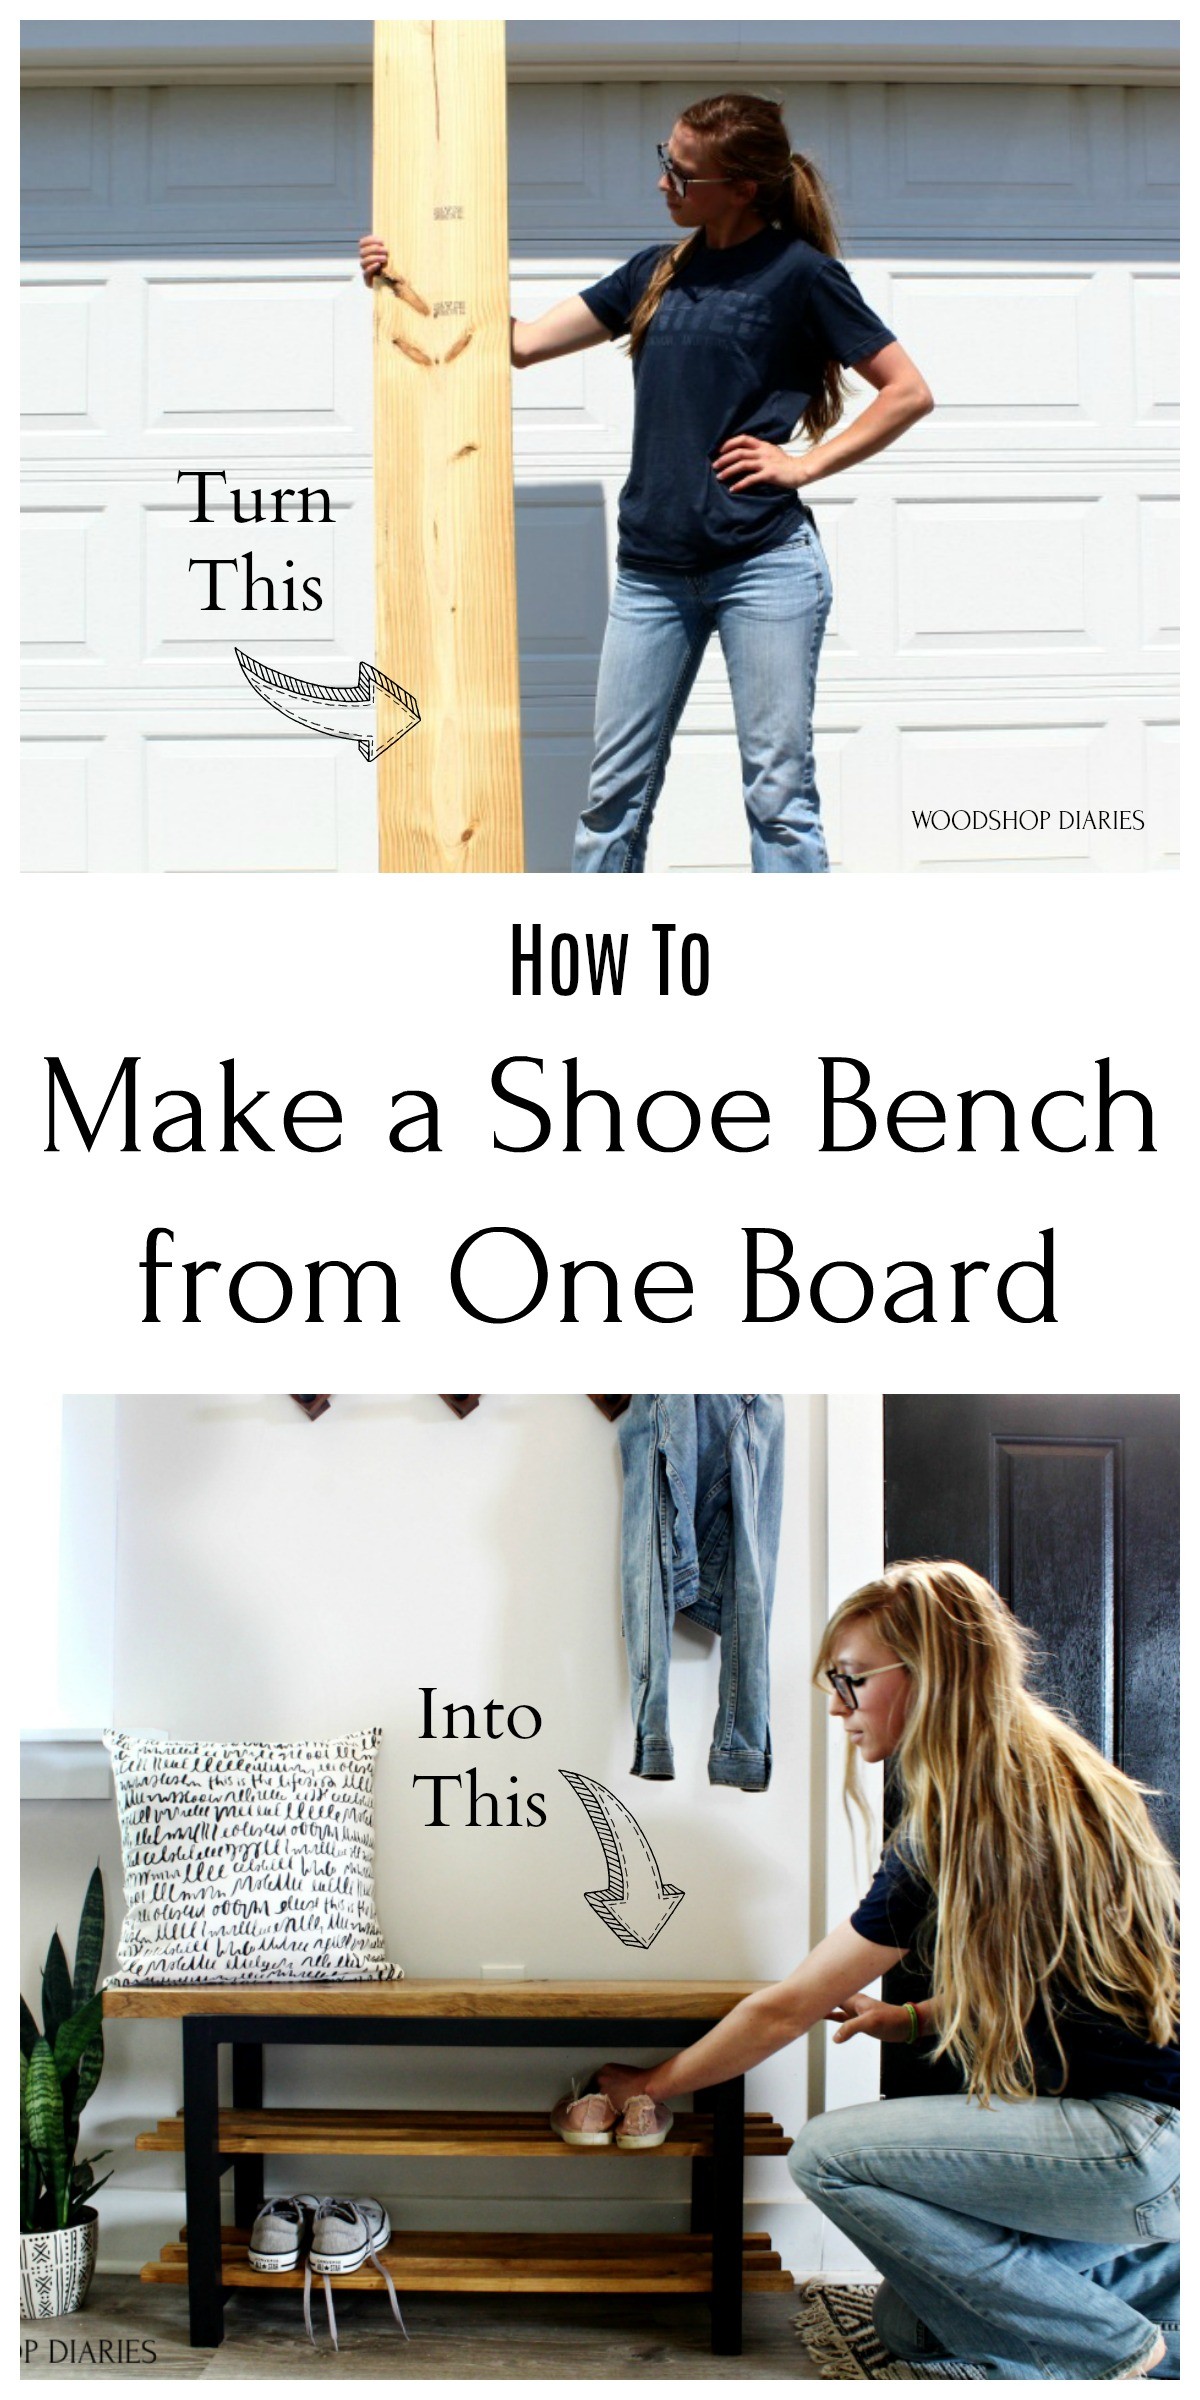 Pinterest Collage image with Shara holding 2x10 board and placing shoes on bench